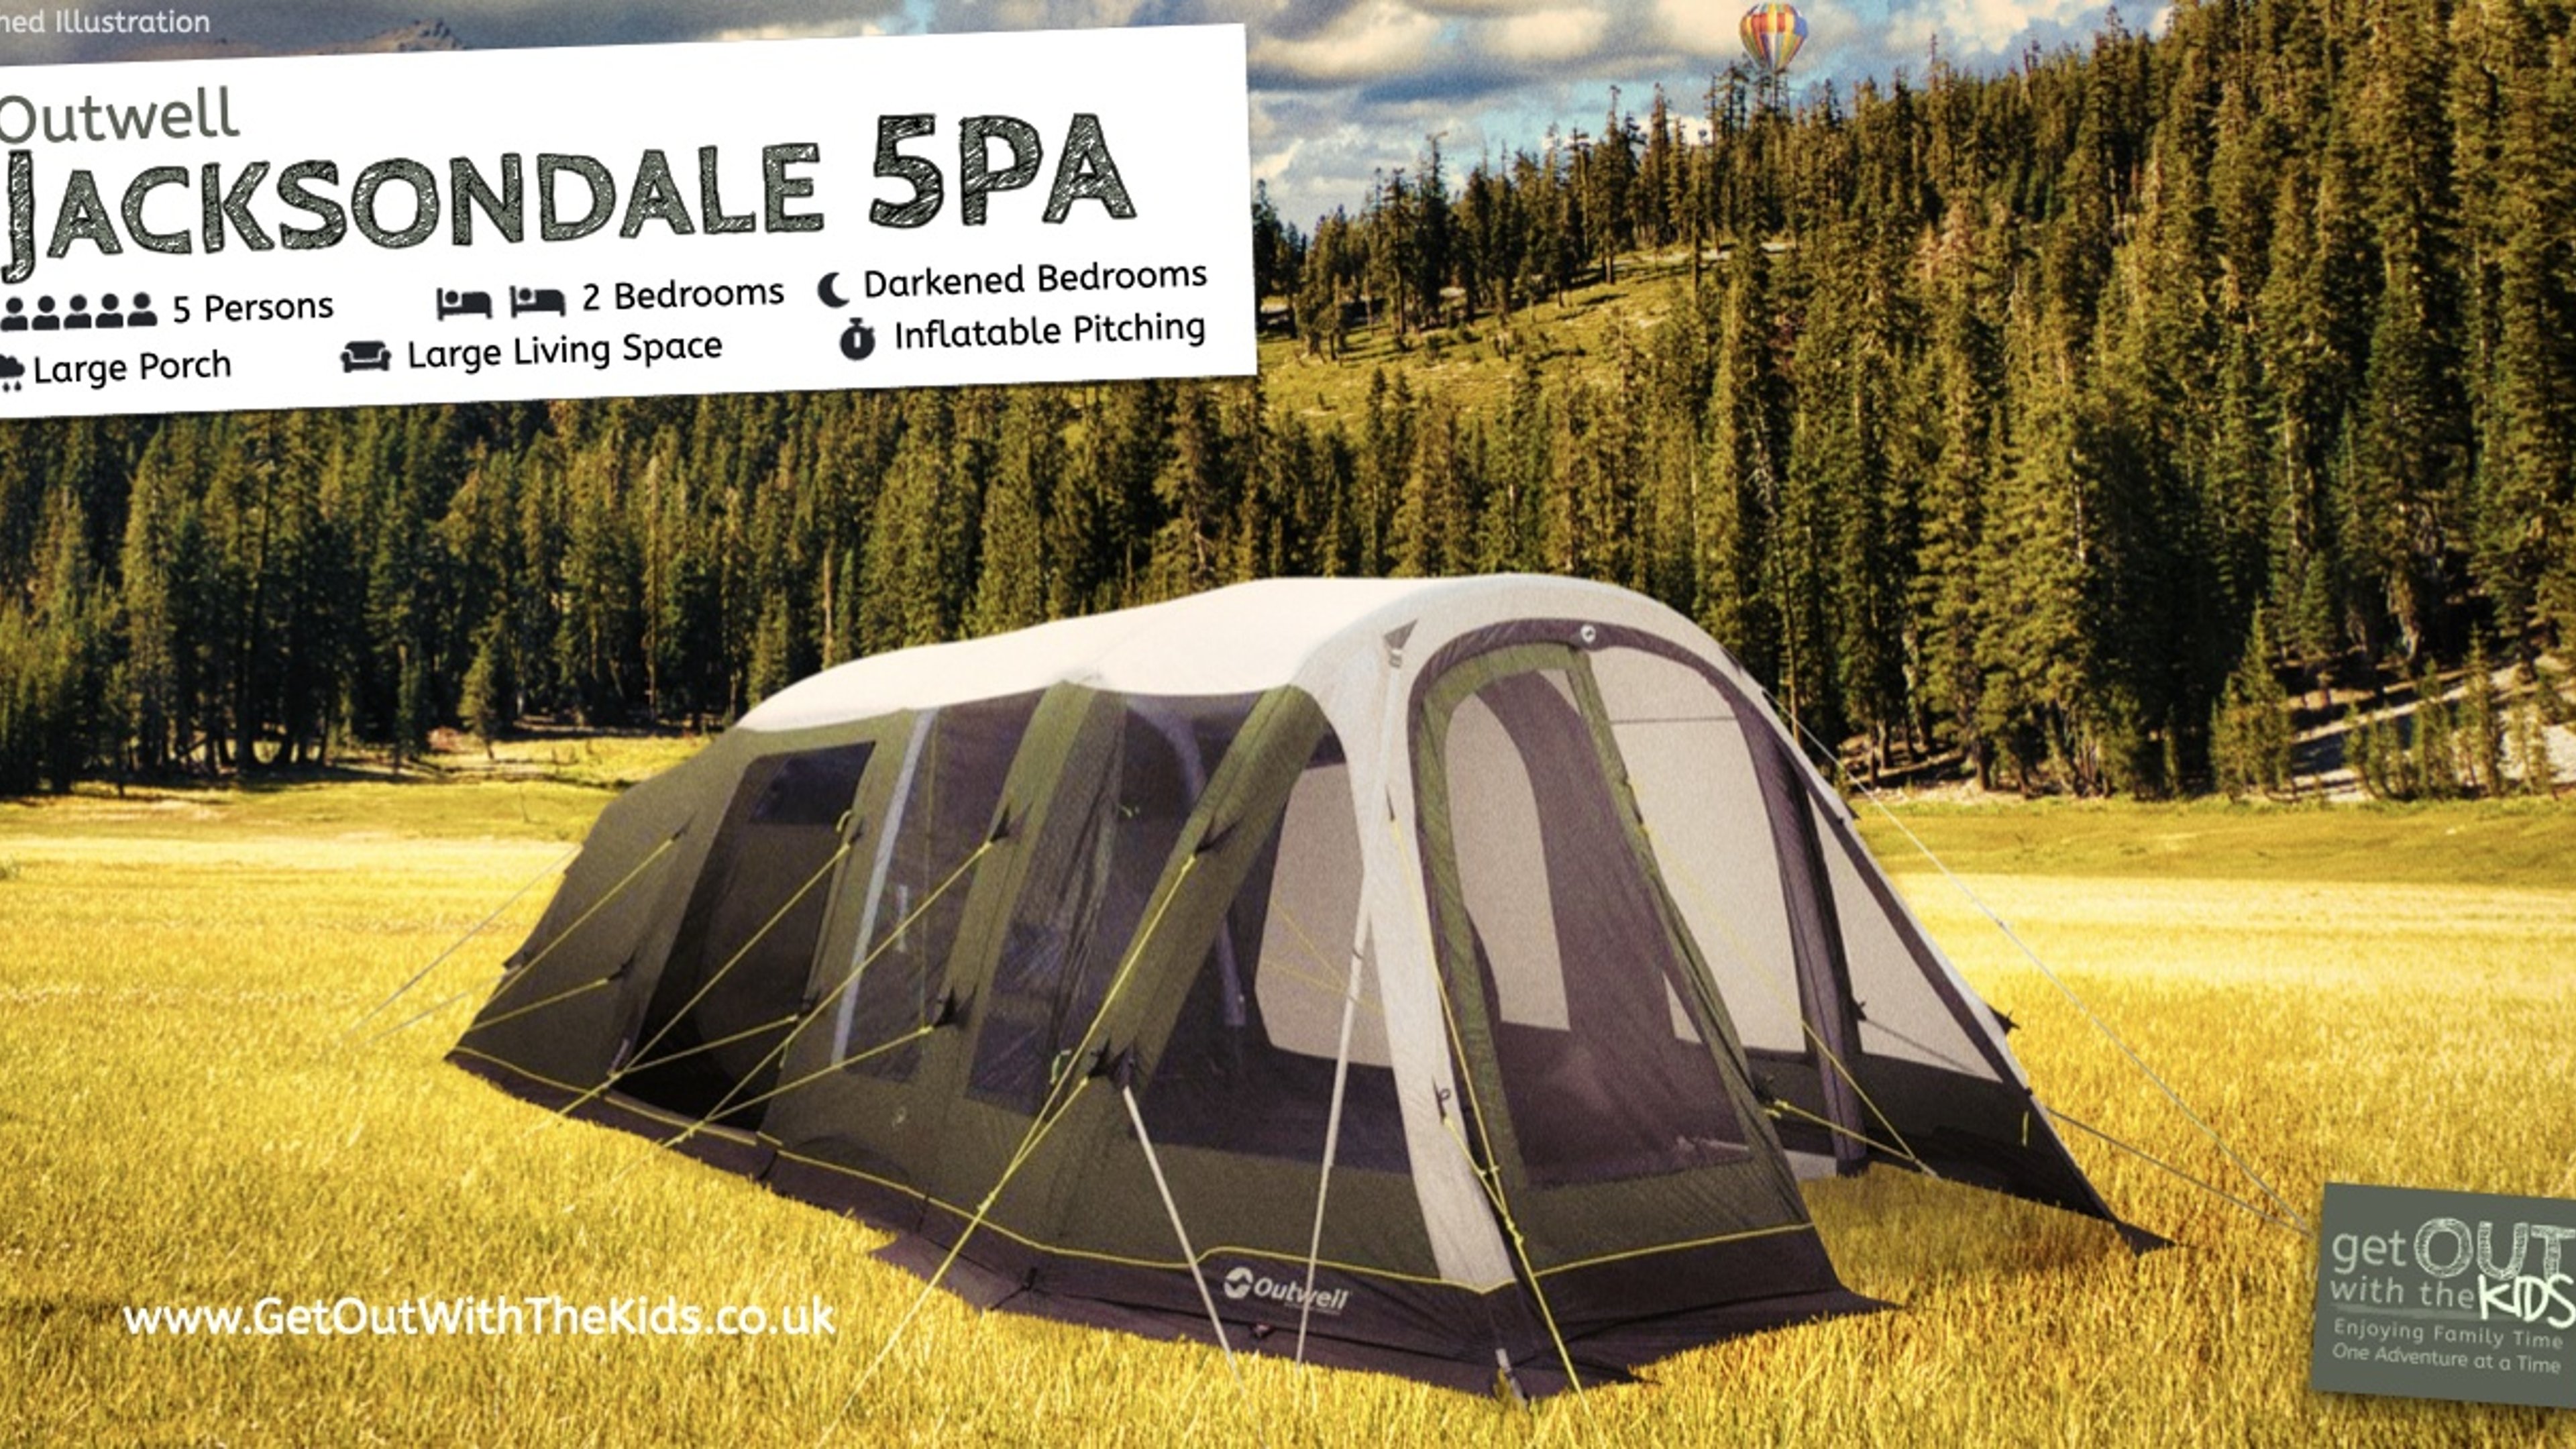 Outwell Jacksondale 5PA Tent Review